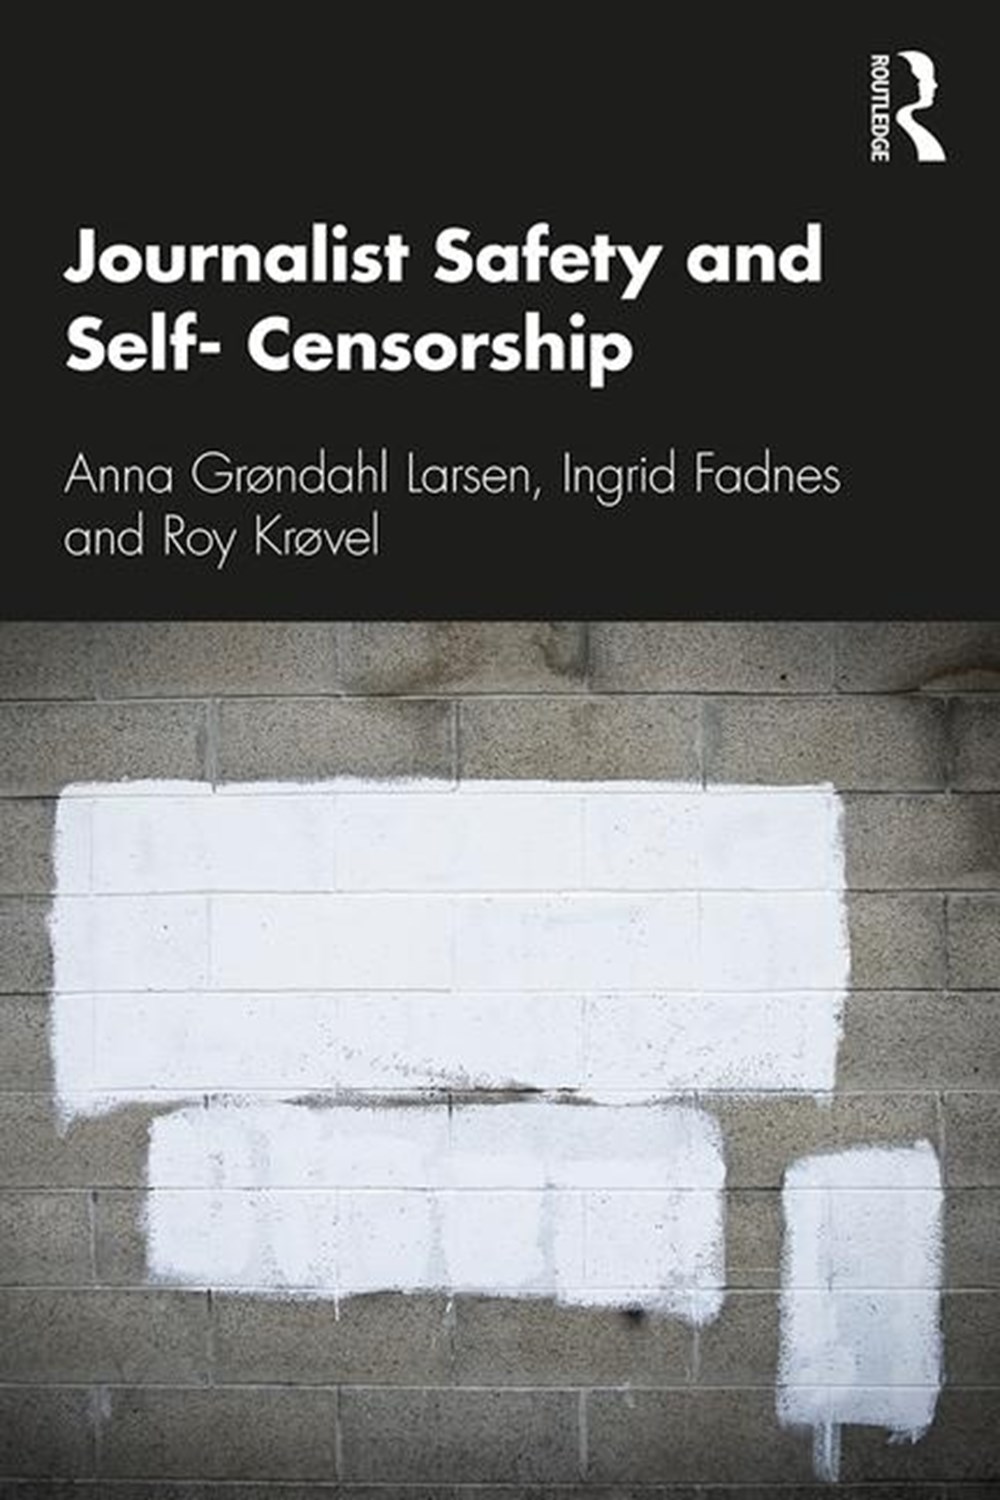 Journalist Safety and Self-Censorship